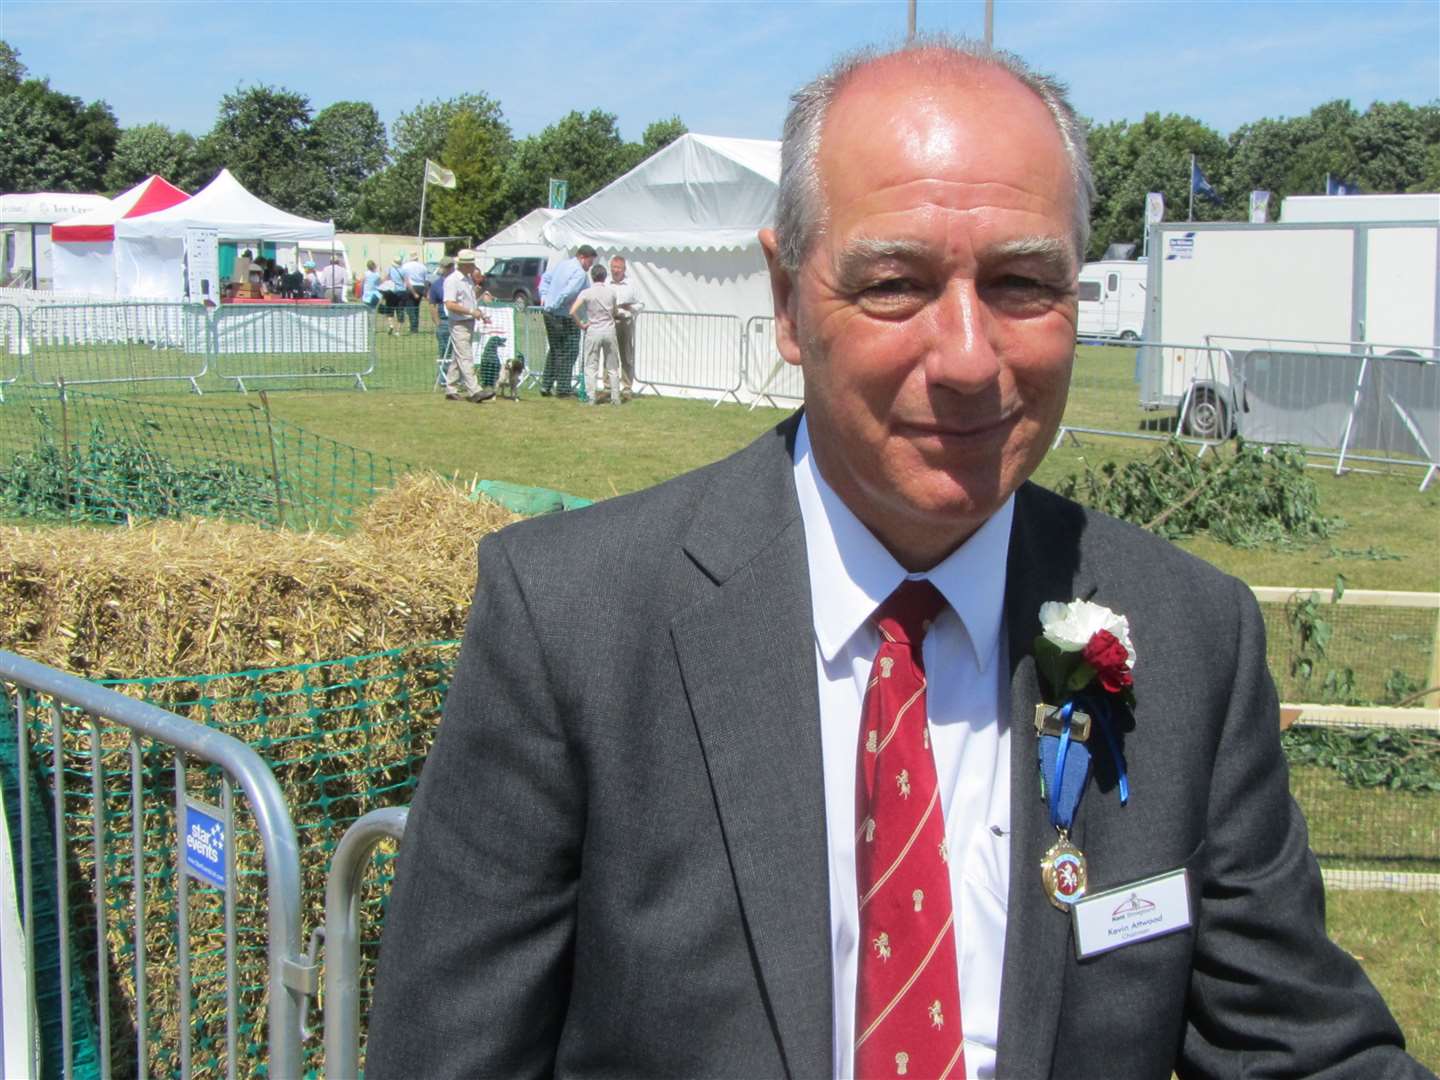 Kevin Attwood is a former chairman of the Kent County Agricultural Society